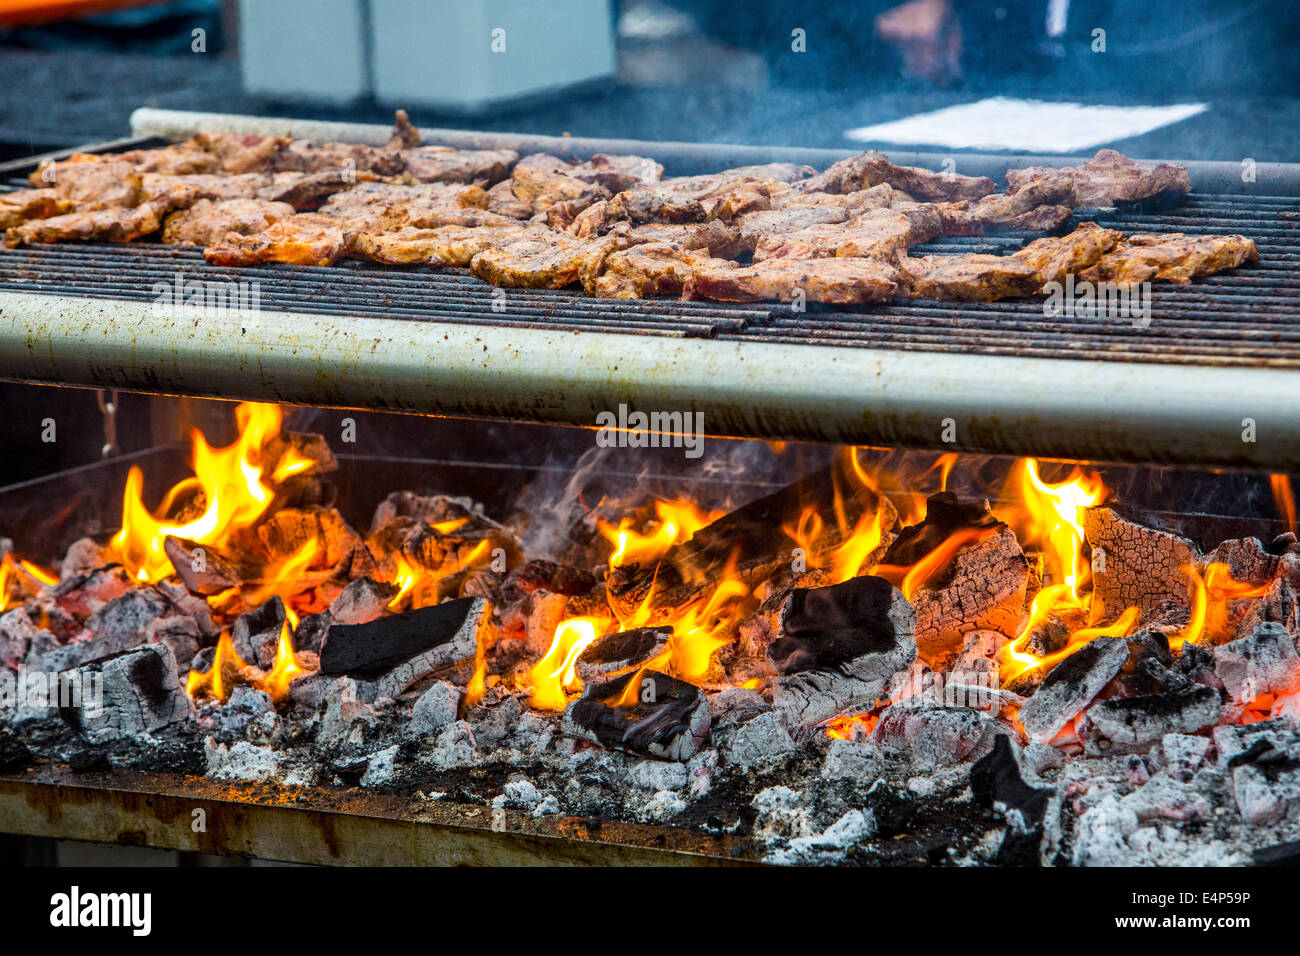 Pork steaks are grilled on a charcoal grill, Stock Photo